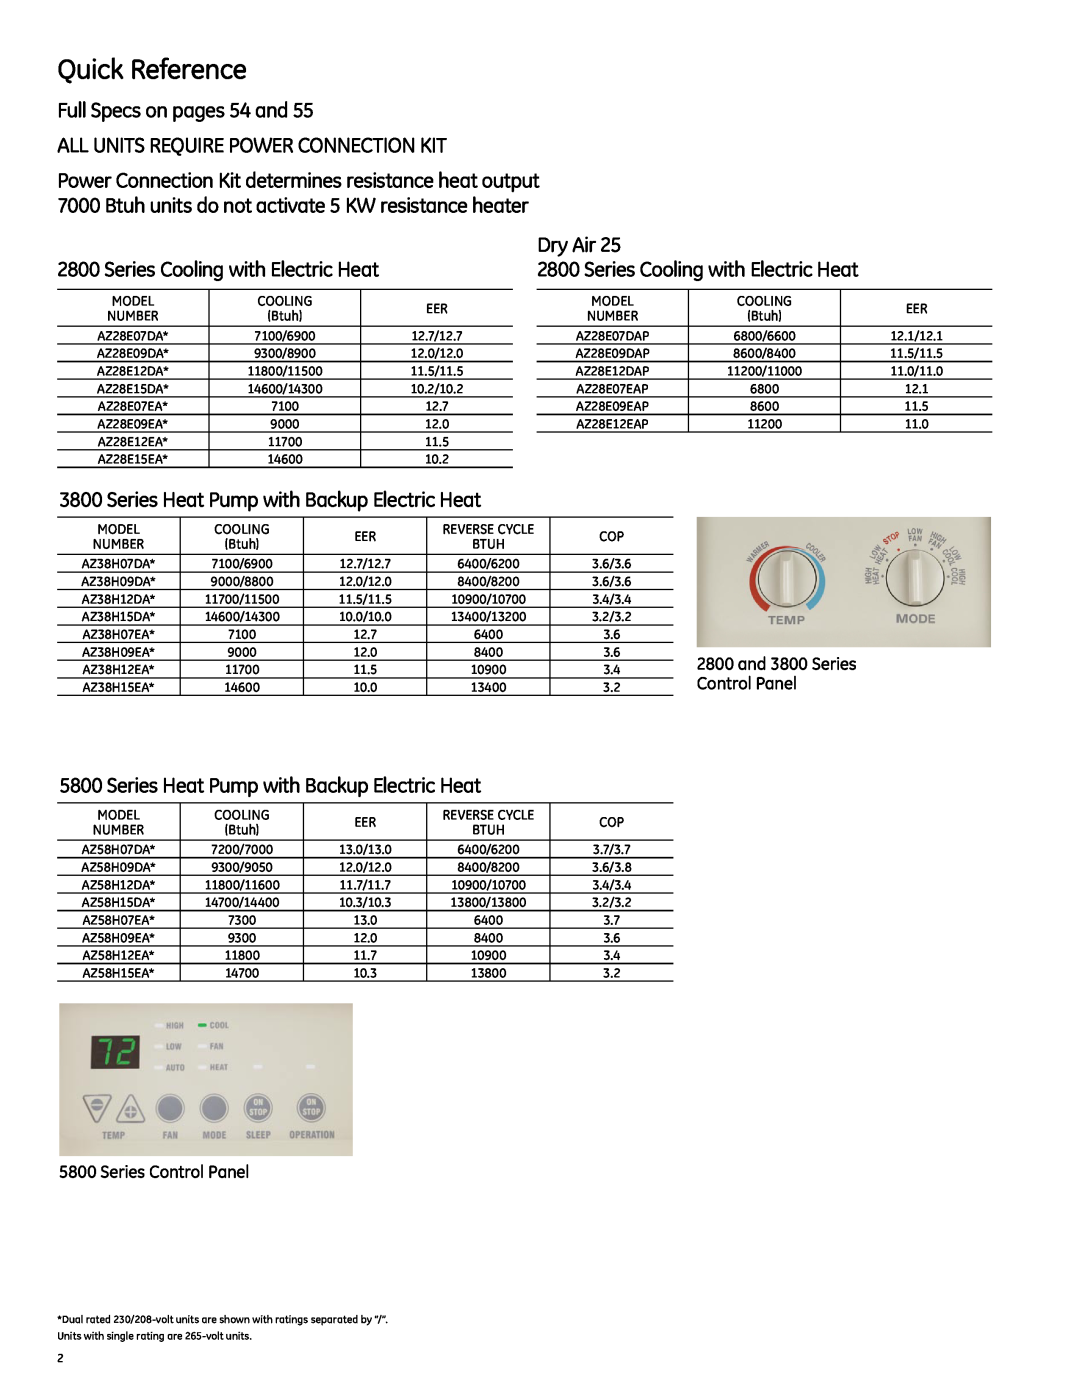 GE 2800 manual Quick Reference, Full Specs on pages 54 and, All Units Require Power Connection Kit 